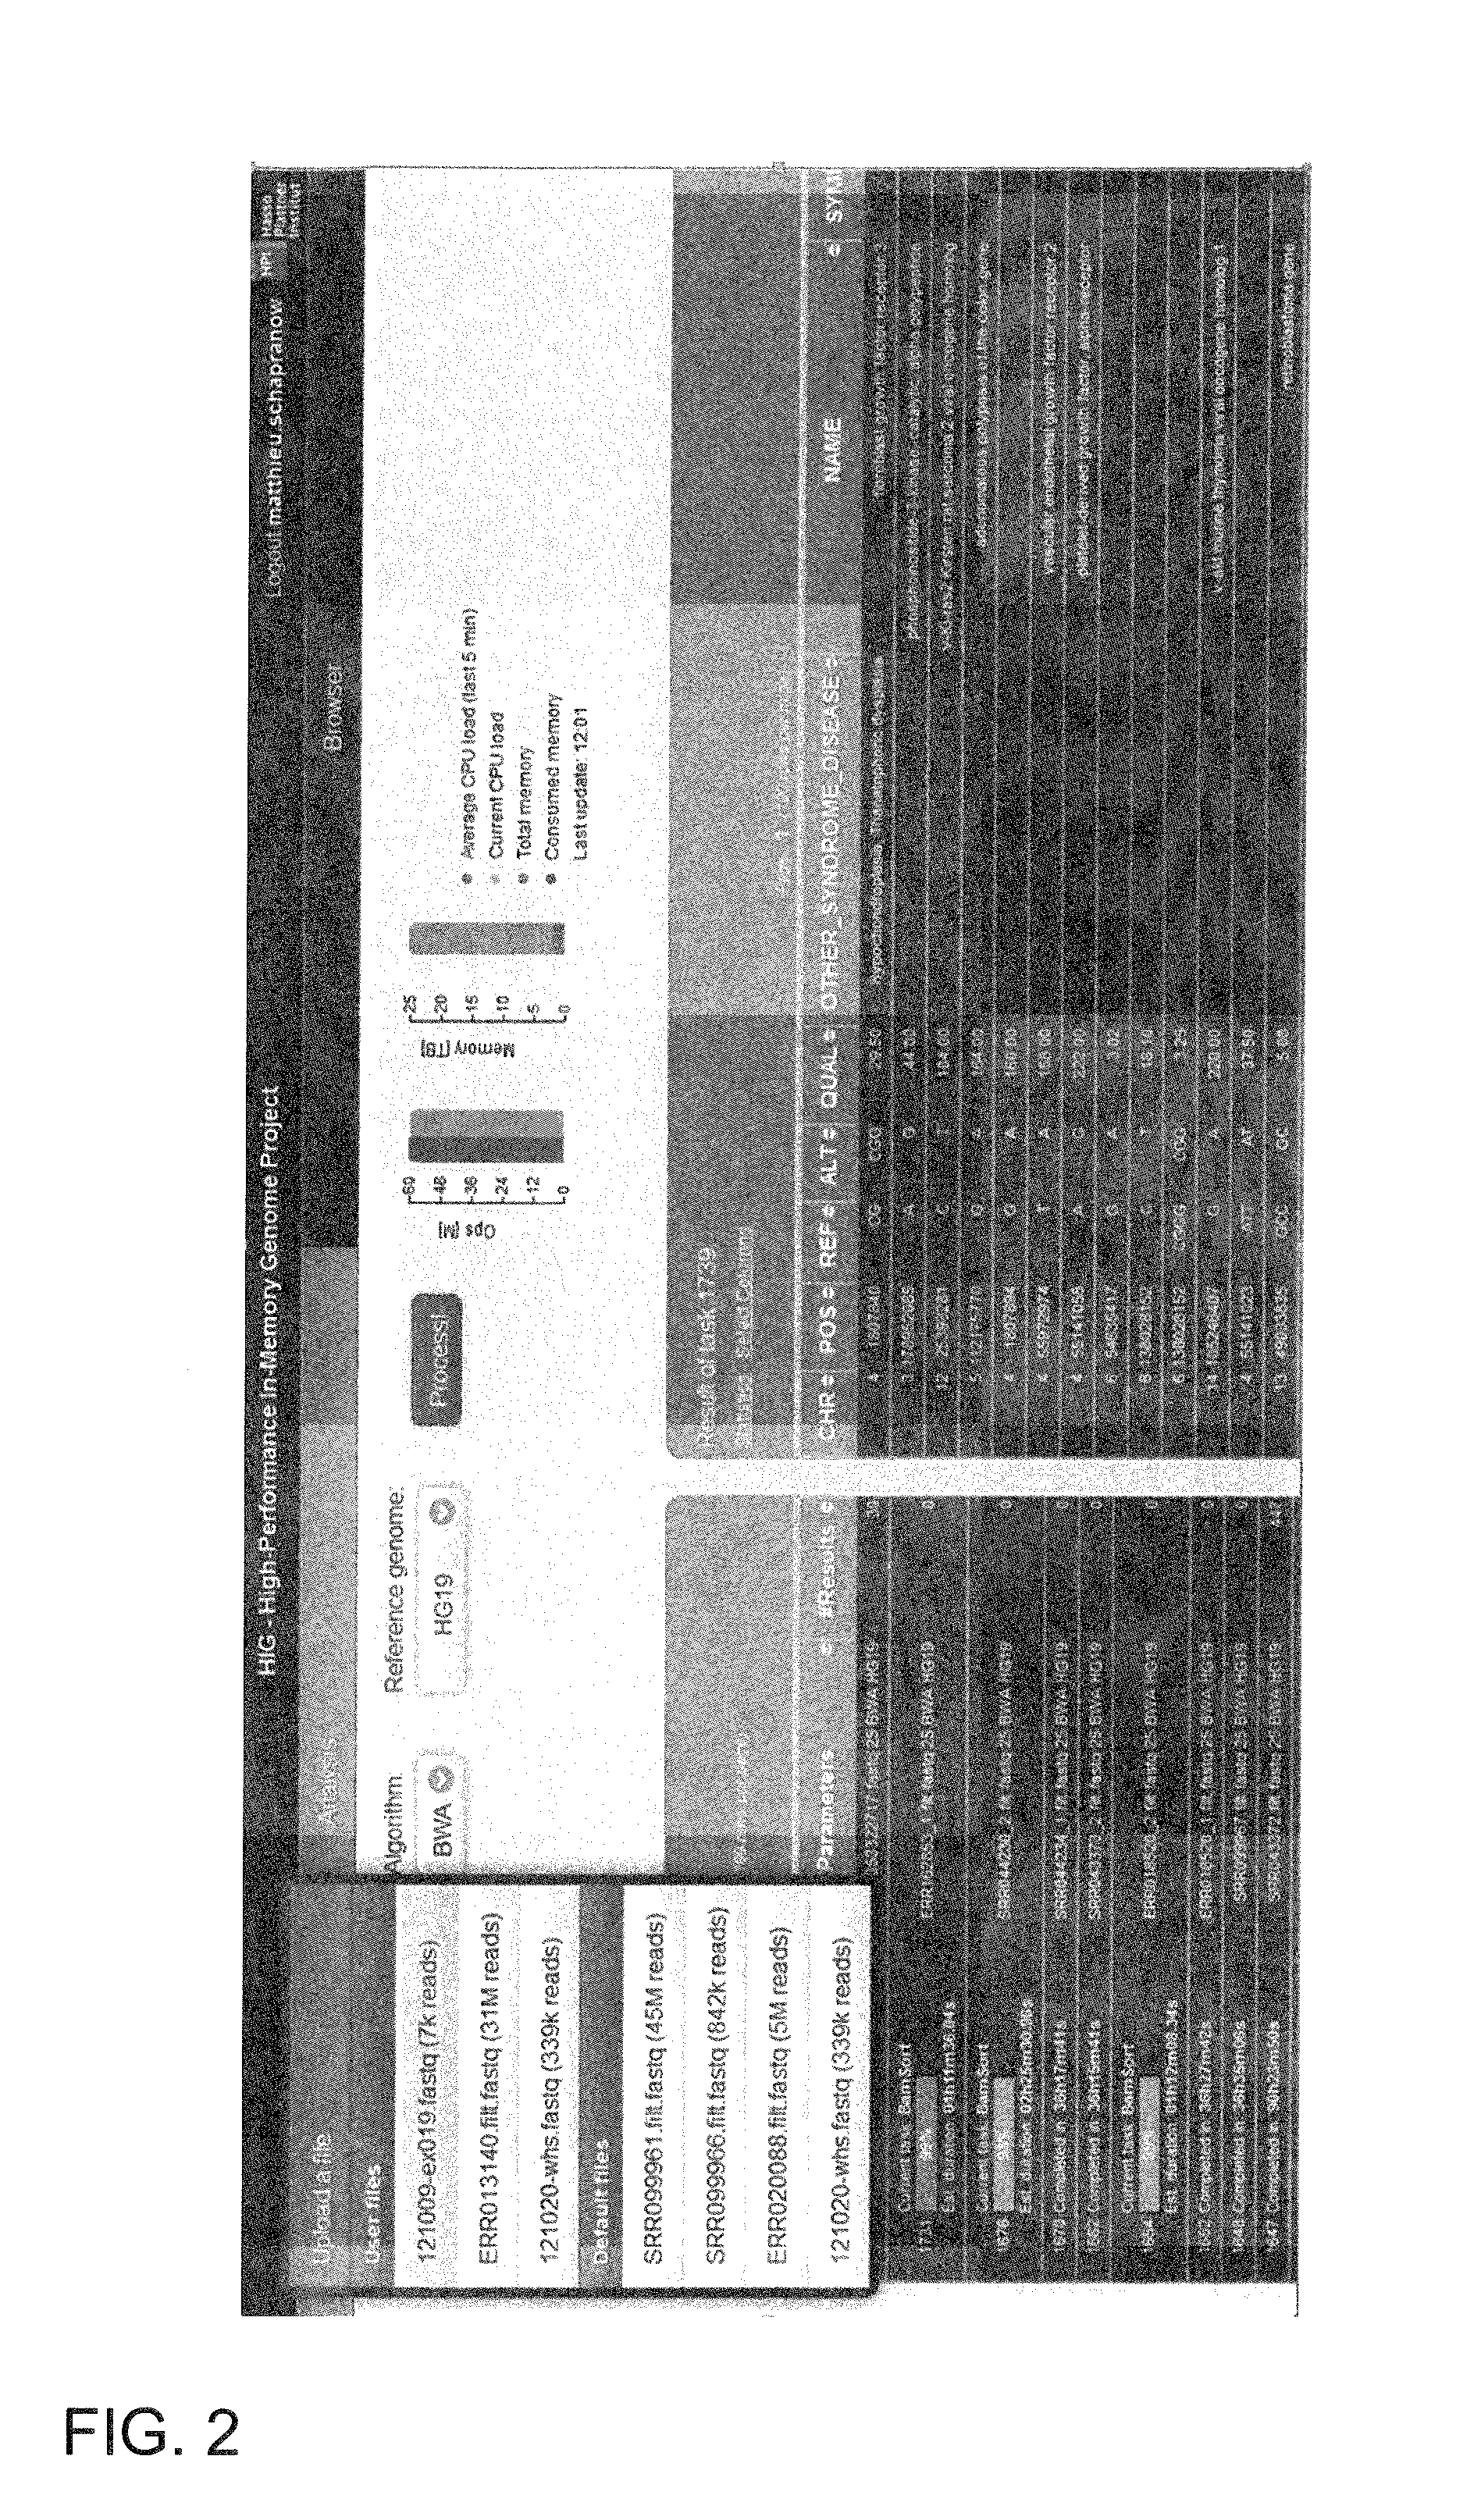 System and method for genomic data processing with an in-memory database system and real-time analysis